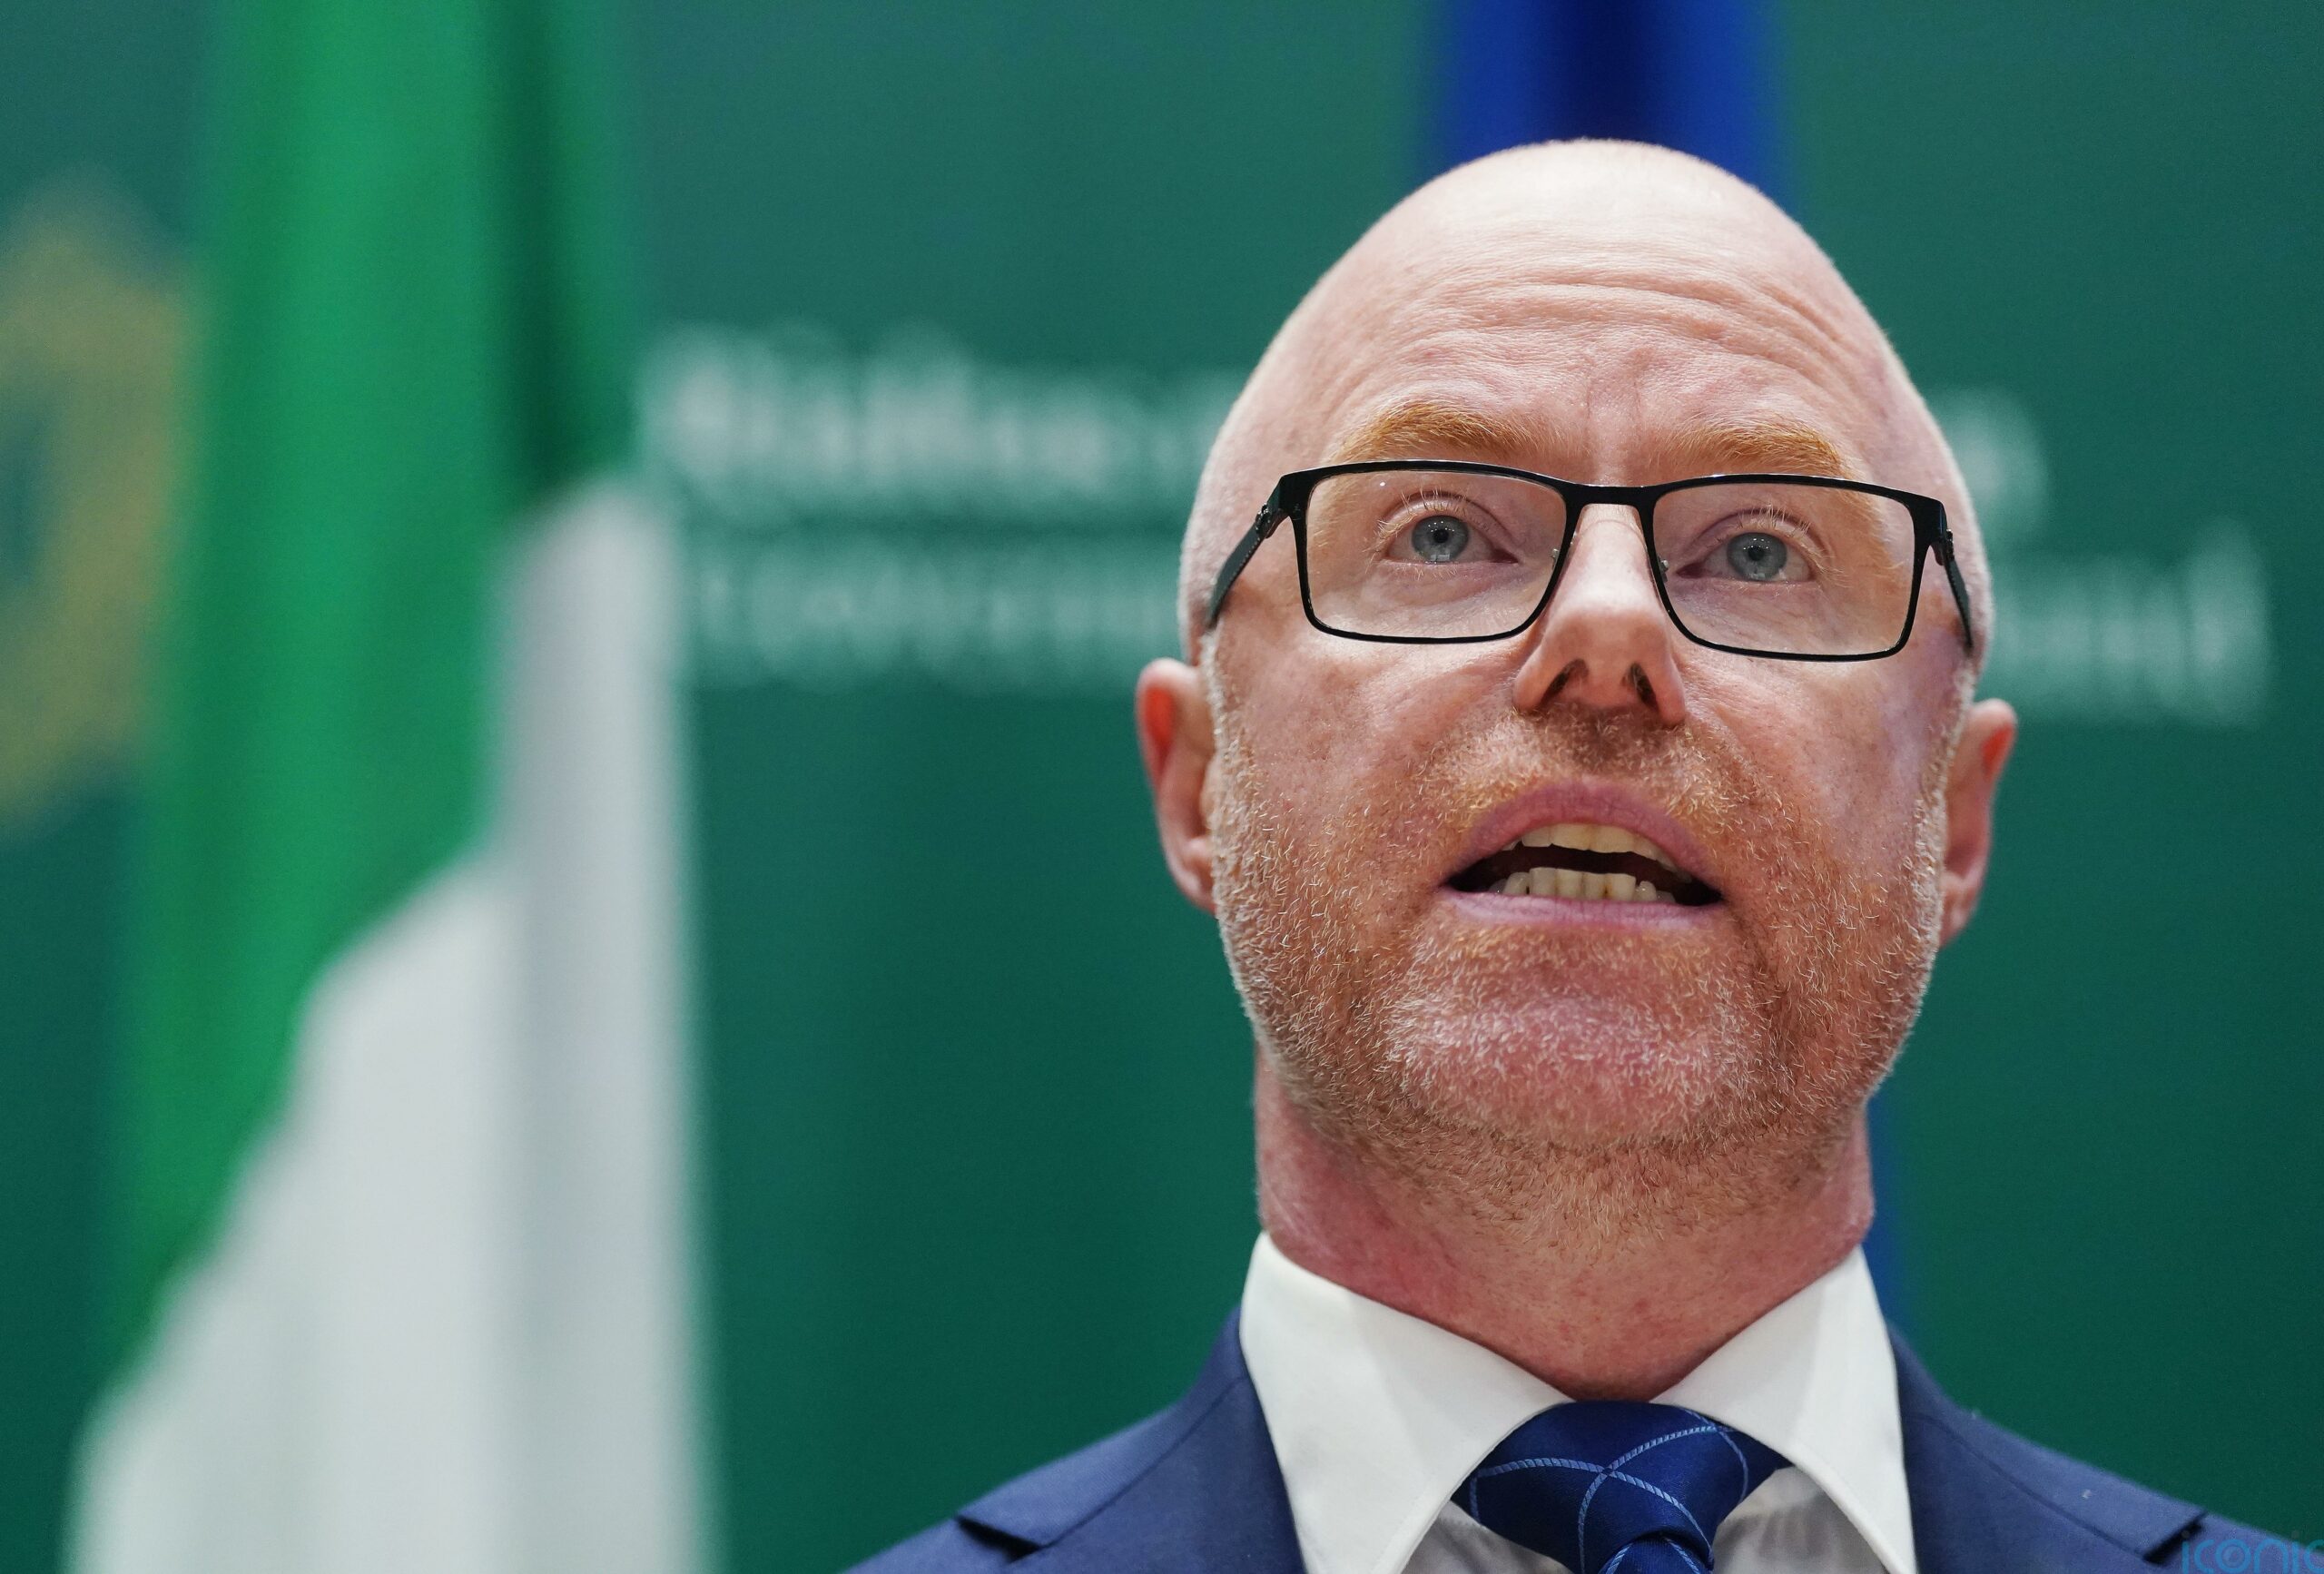 The Minister for Health, Stephen Donnelly has been insisting recently that hospital waiting lists for treatment are on the decline but the statistics do not really bear that out.